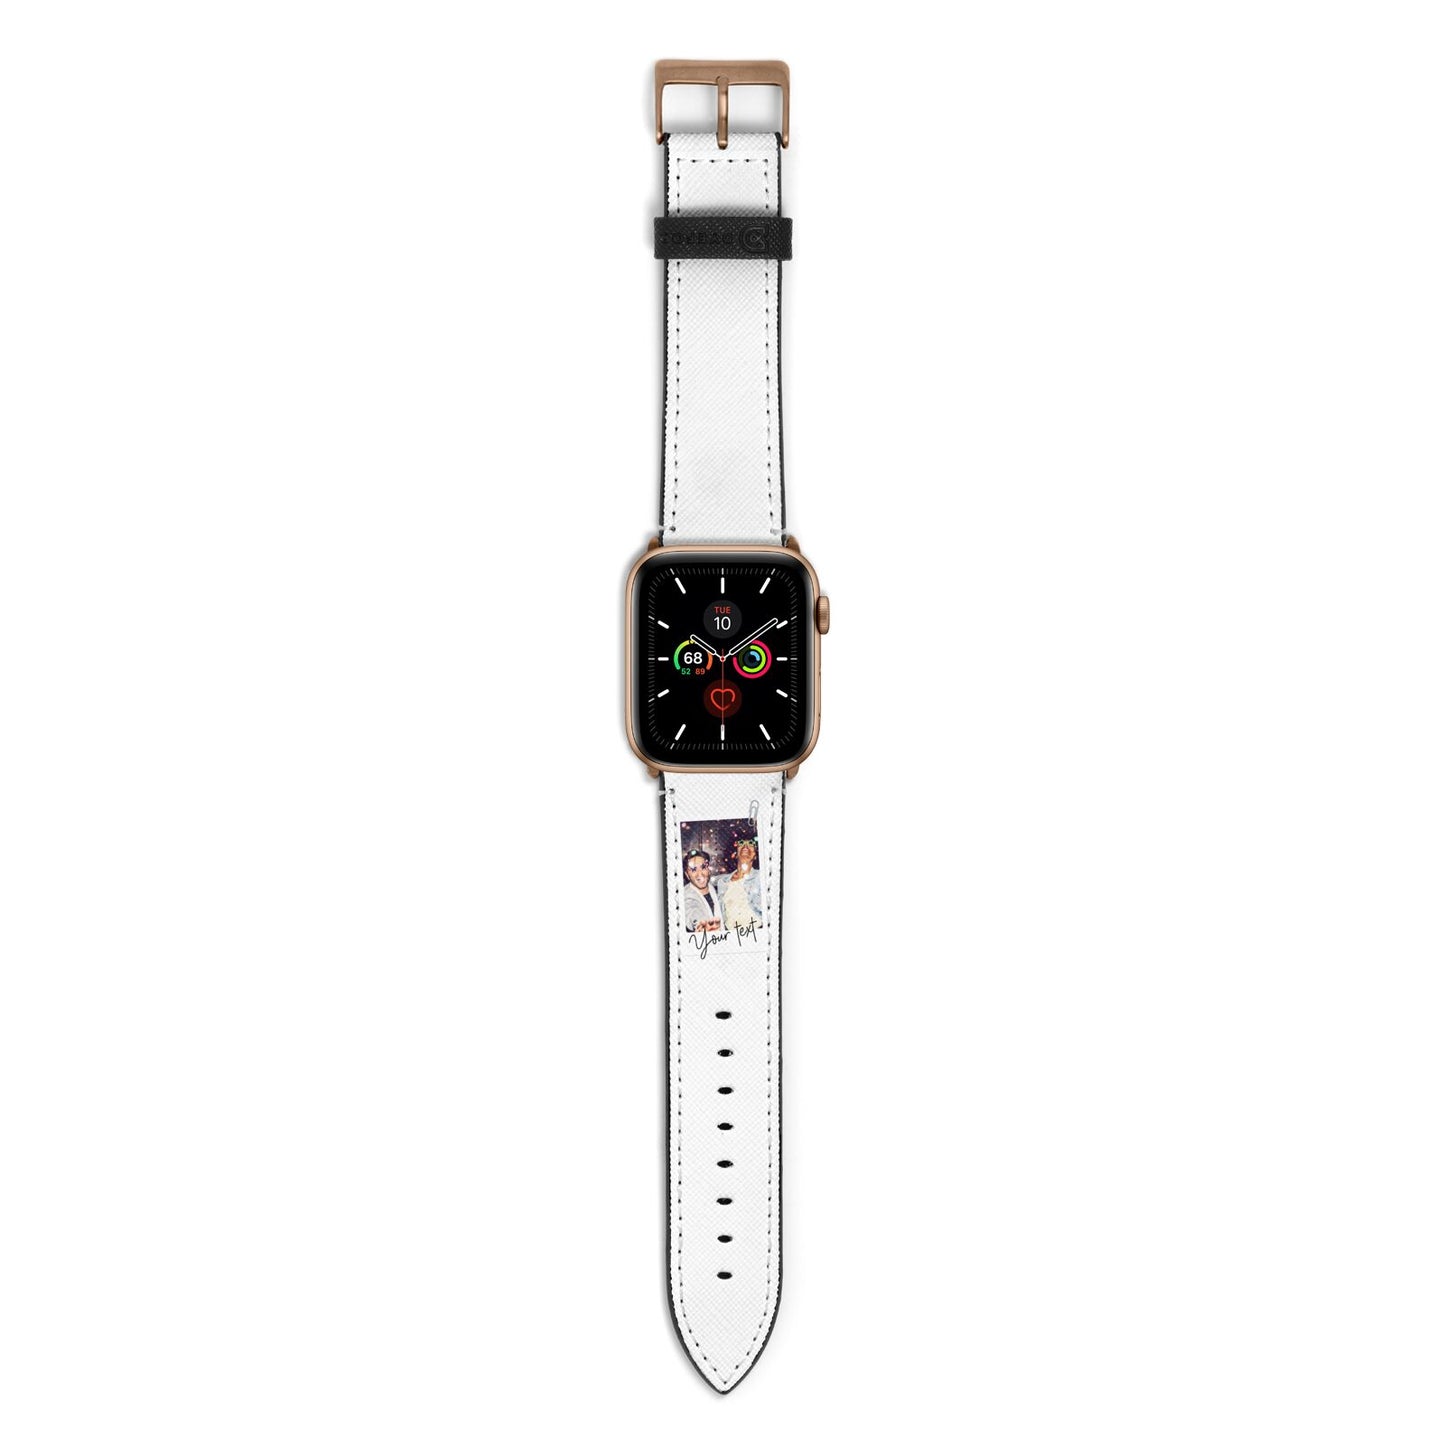 Personalised Photo with Text Apple Watch Strap with Gold Hardware